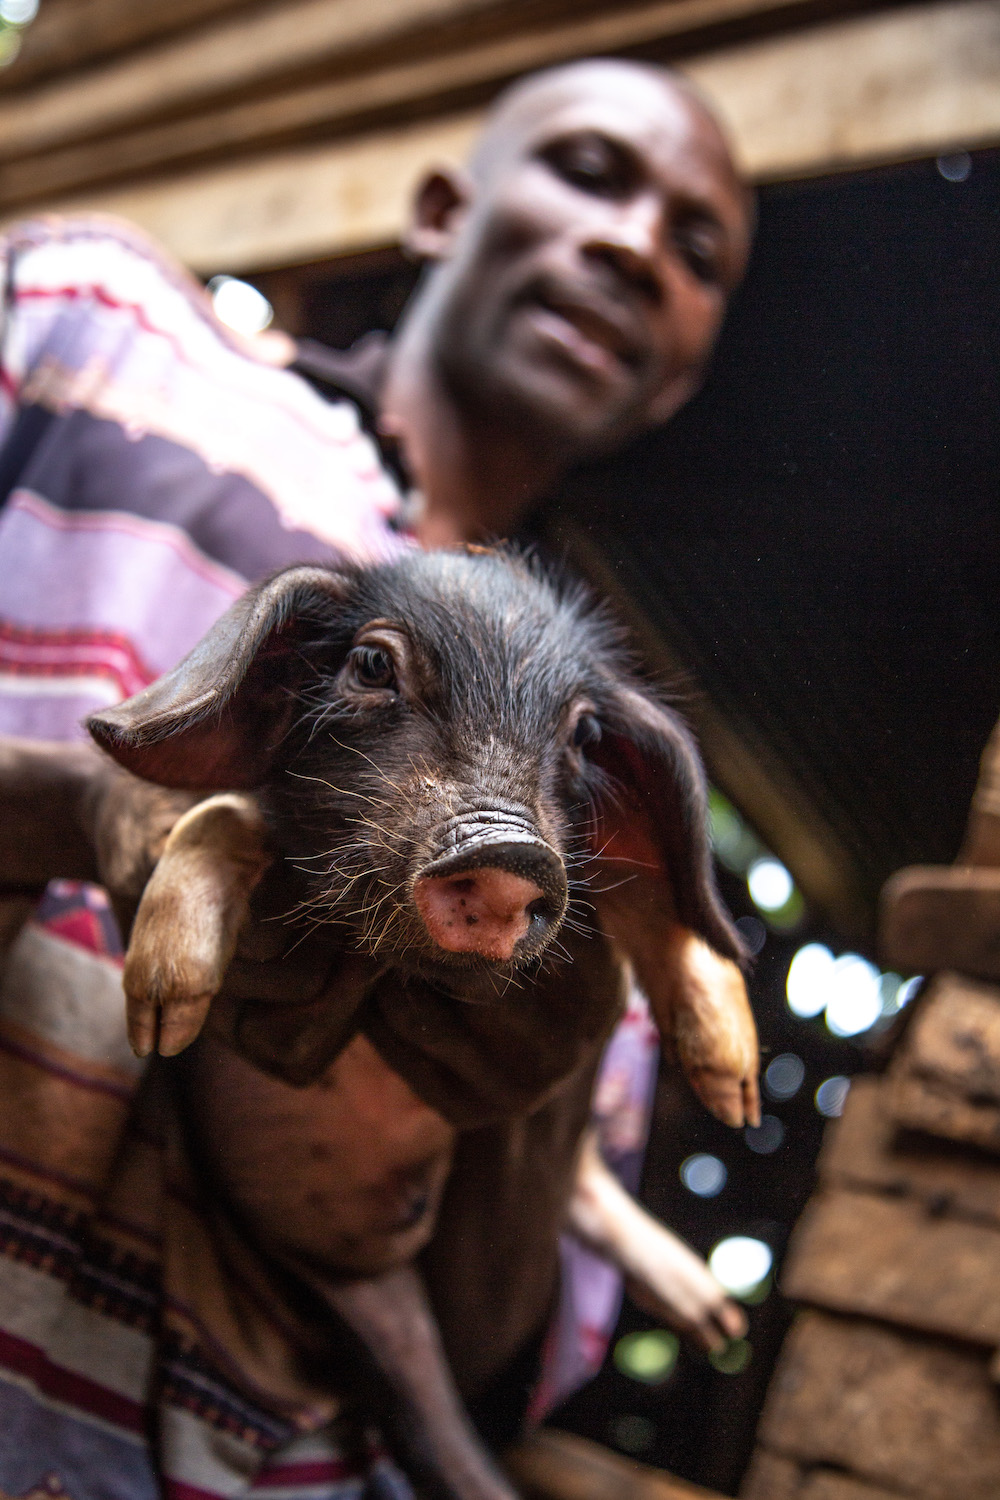 A man holds a black piglet with floppy ears and wiry whiskers.